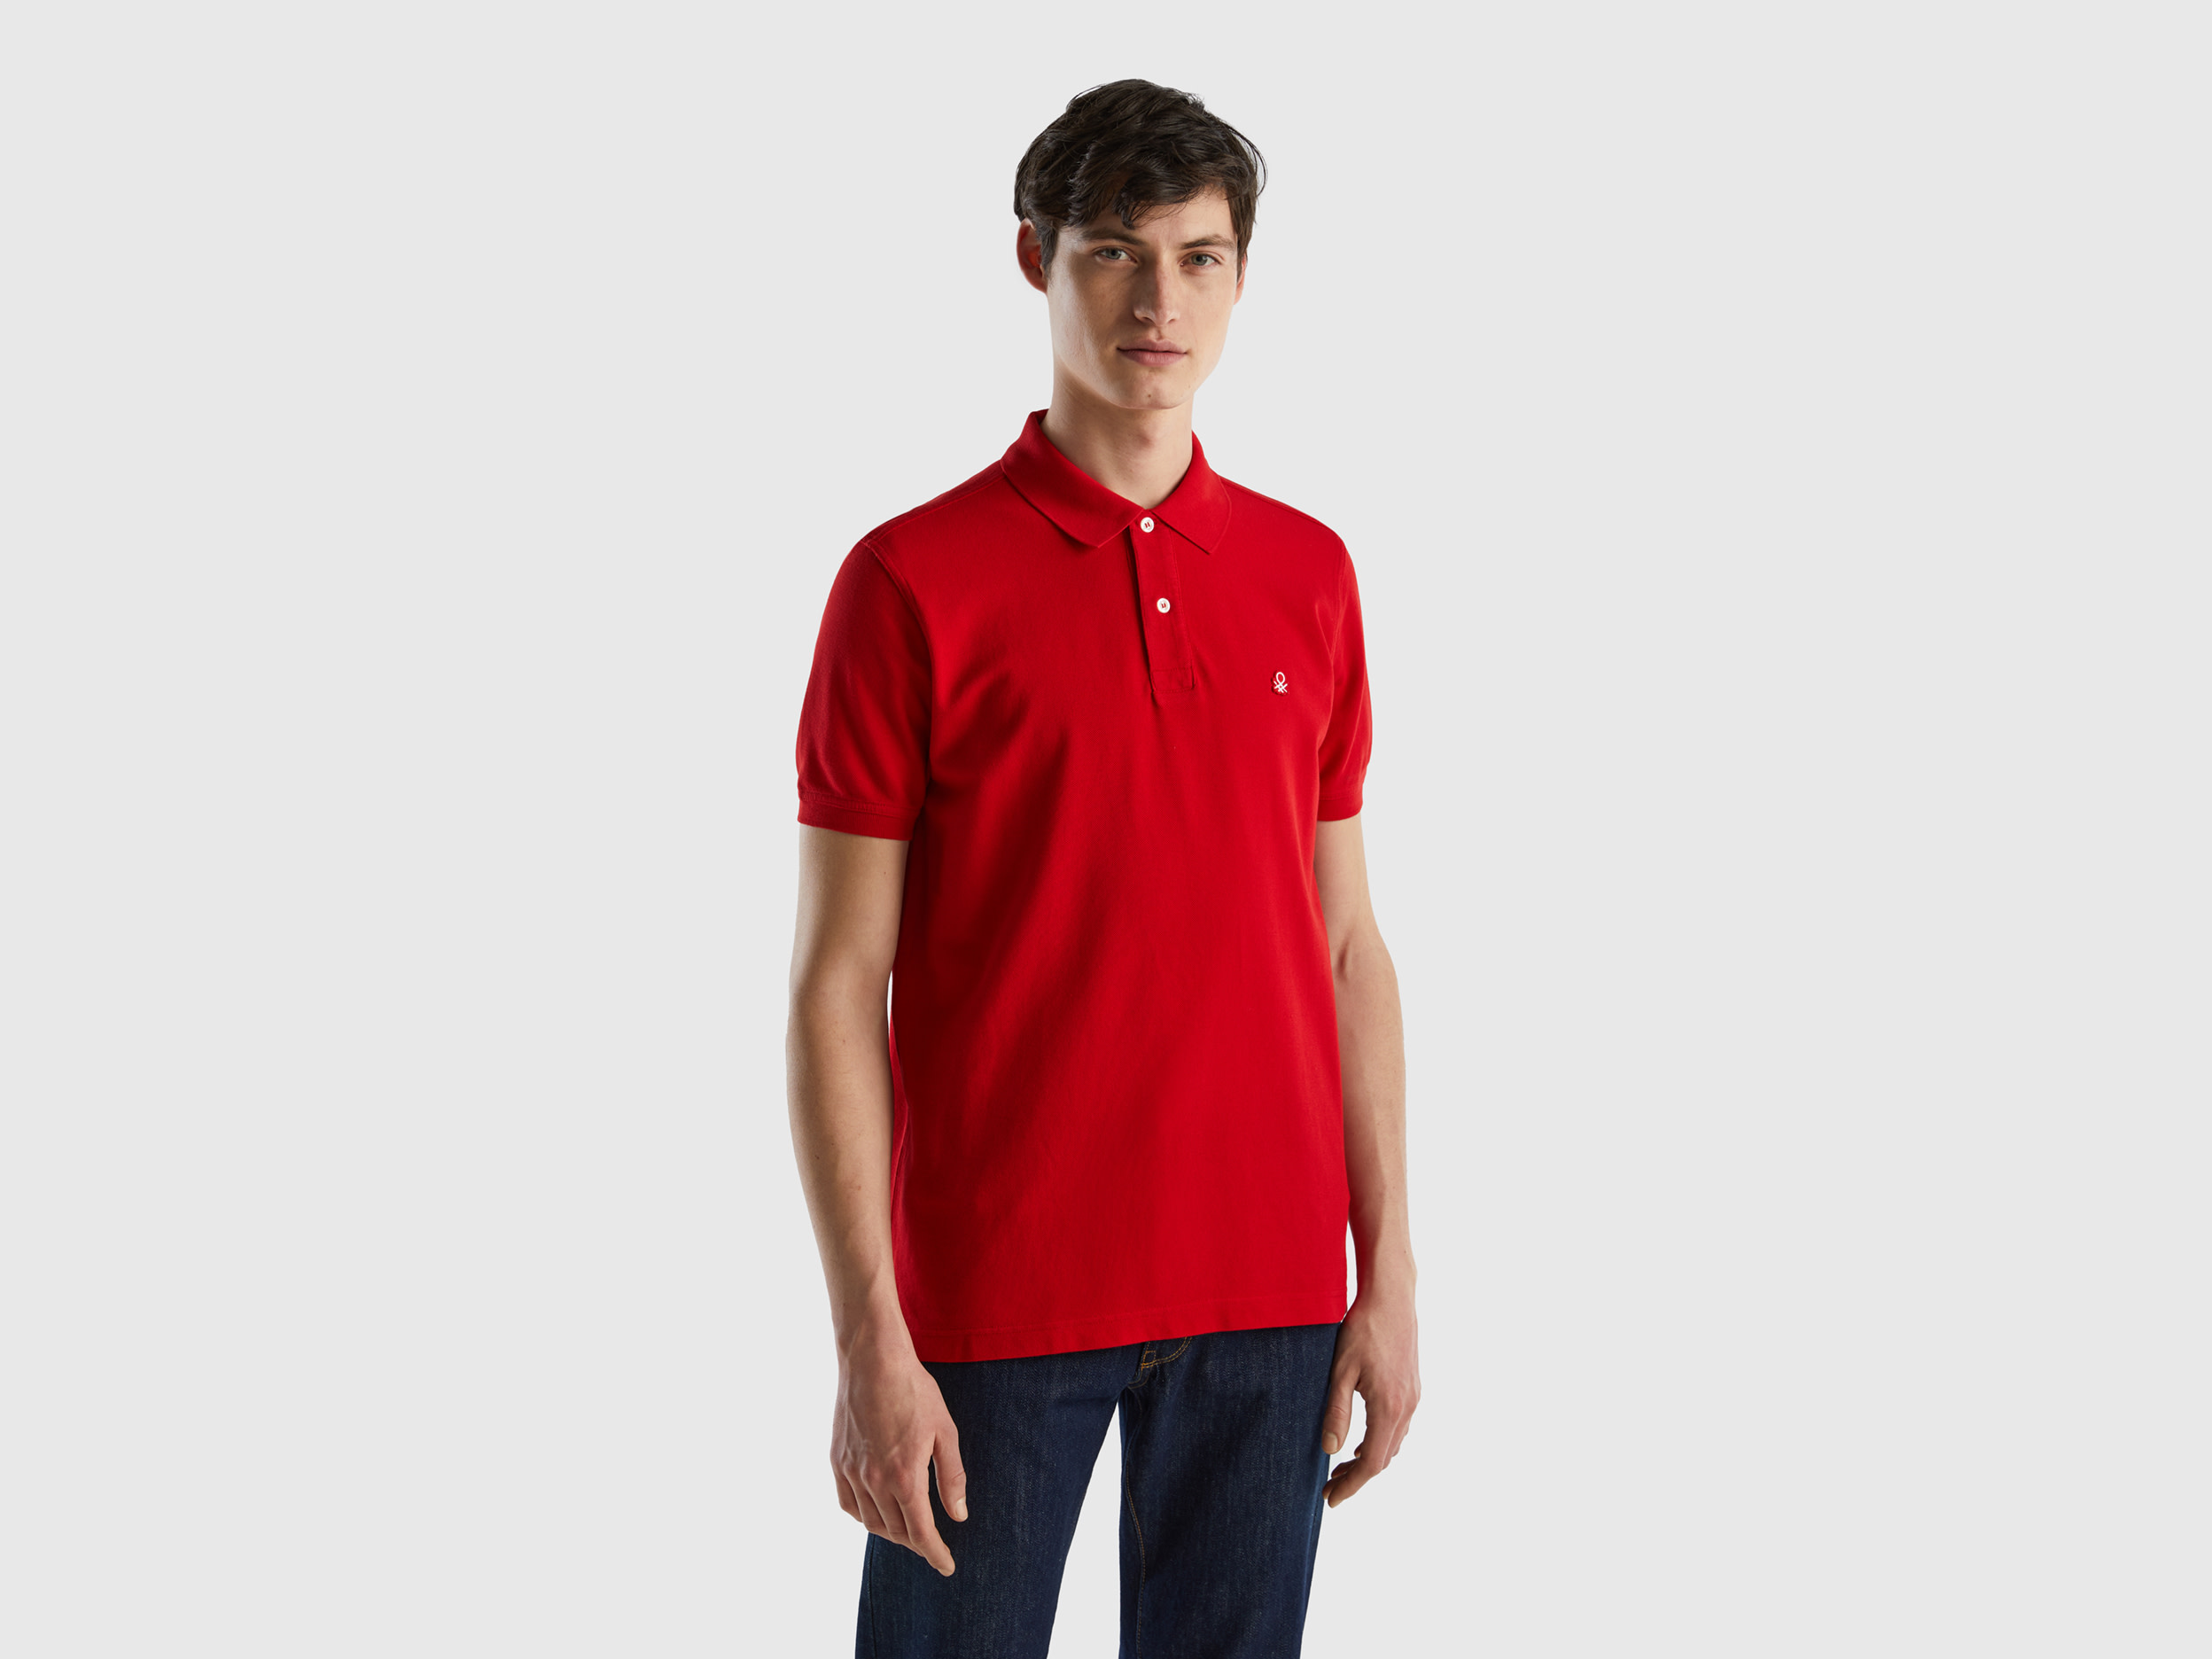 Image of Benetton, Red Regular Fit Polo, size XXXL, Red, Men